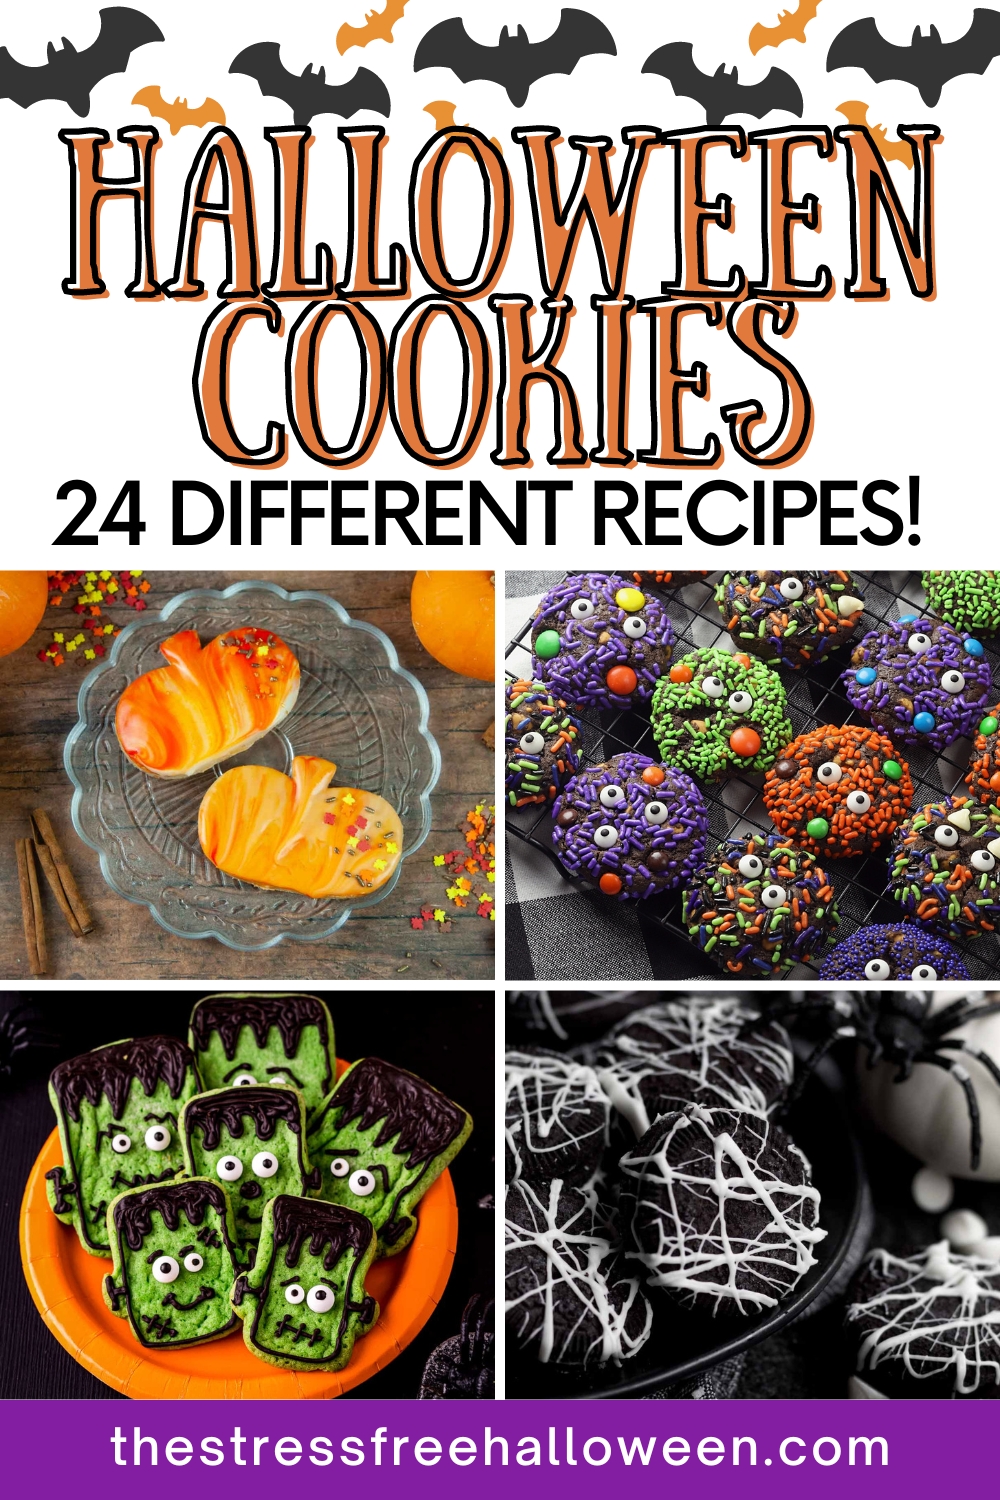 Collage with marbled pumpkin cookies, sprinkle cookies, monster cookies, and spider web cookies with text Halloween cookies 24 different recipes